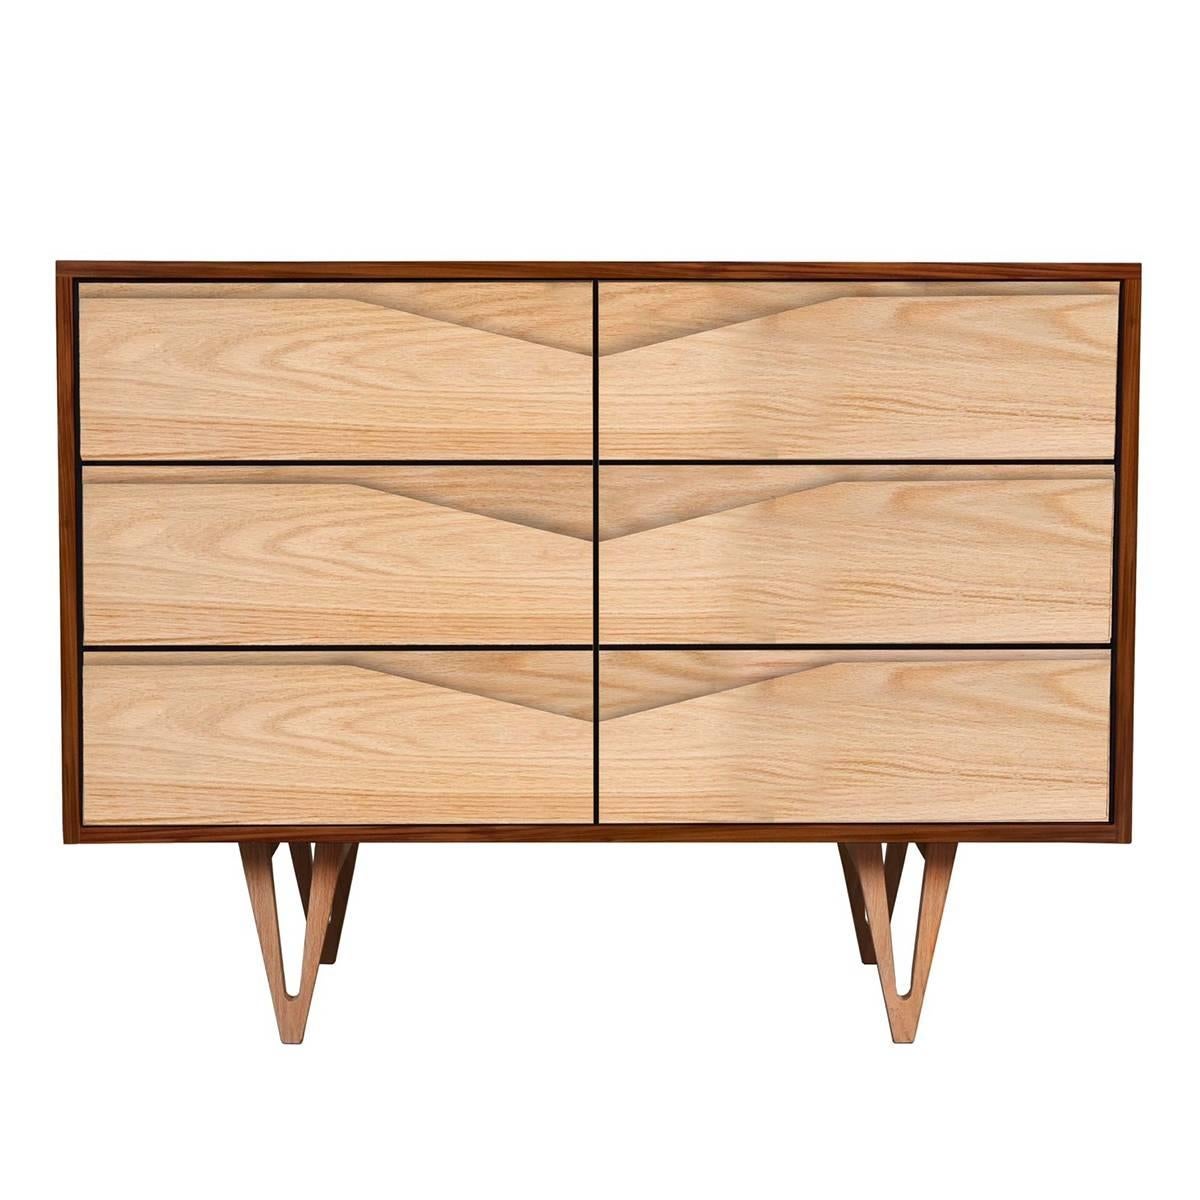 Joinery Harrison Mid-Century Modern Styled Dresser Handcrafted from Solid Ash and Walnut For Sale